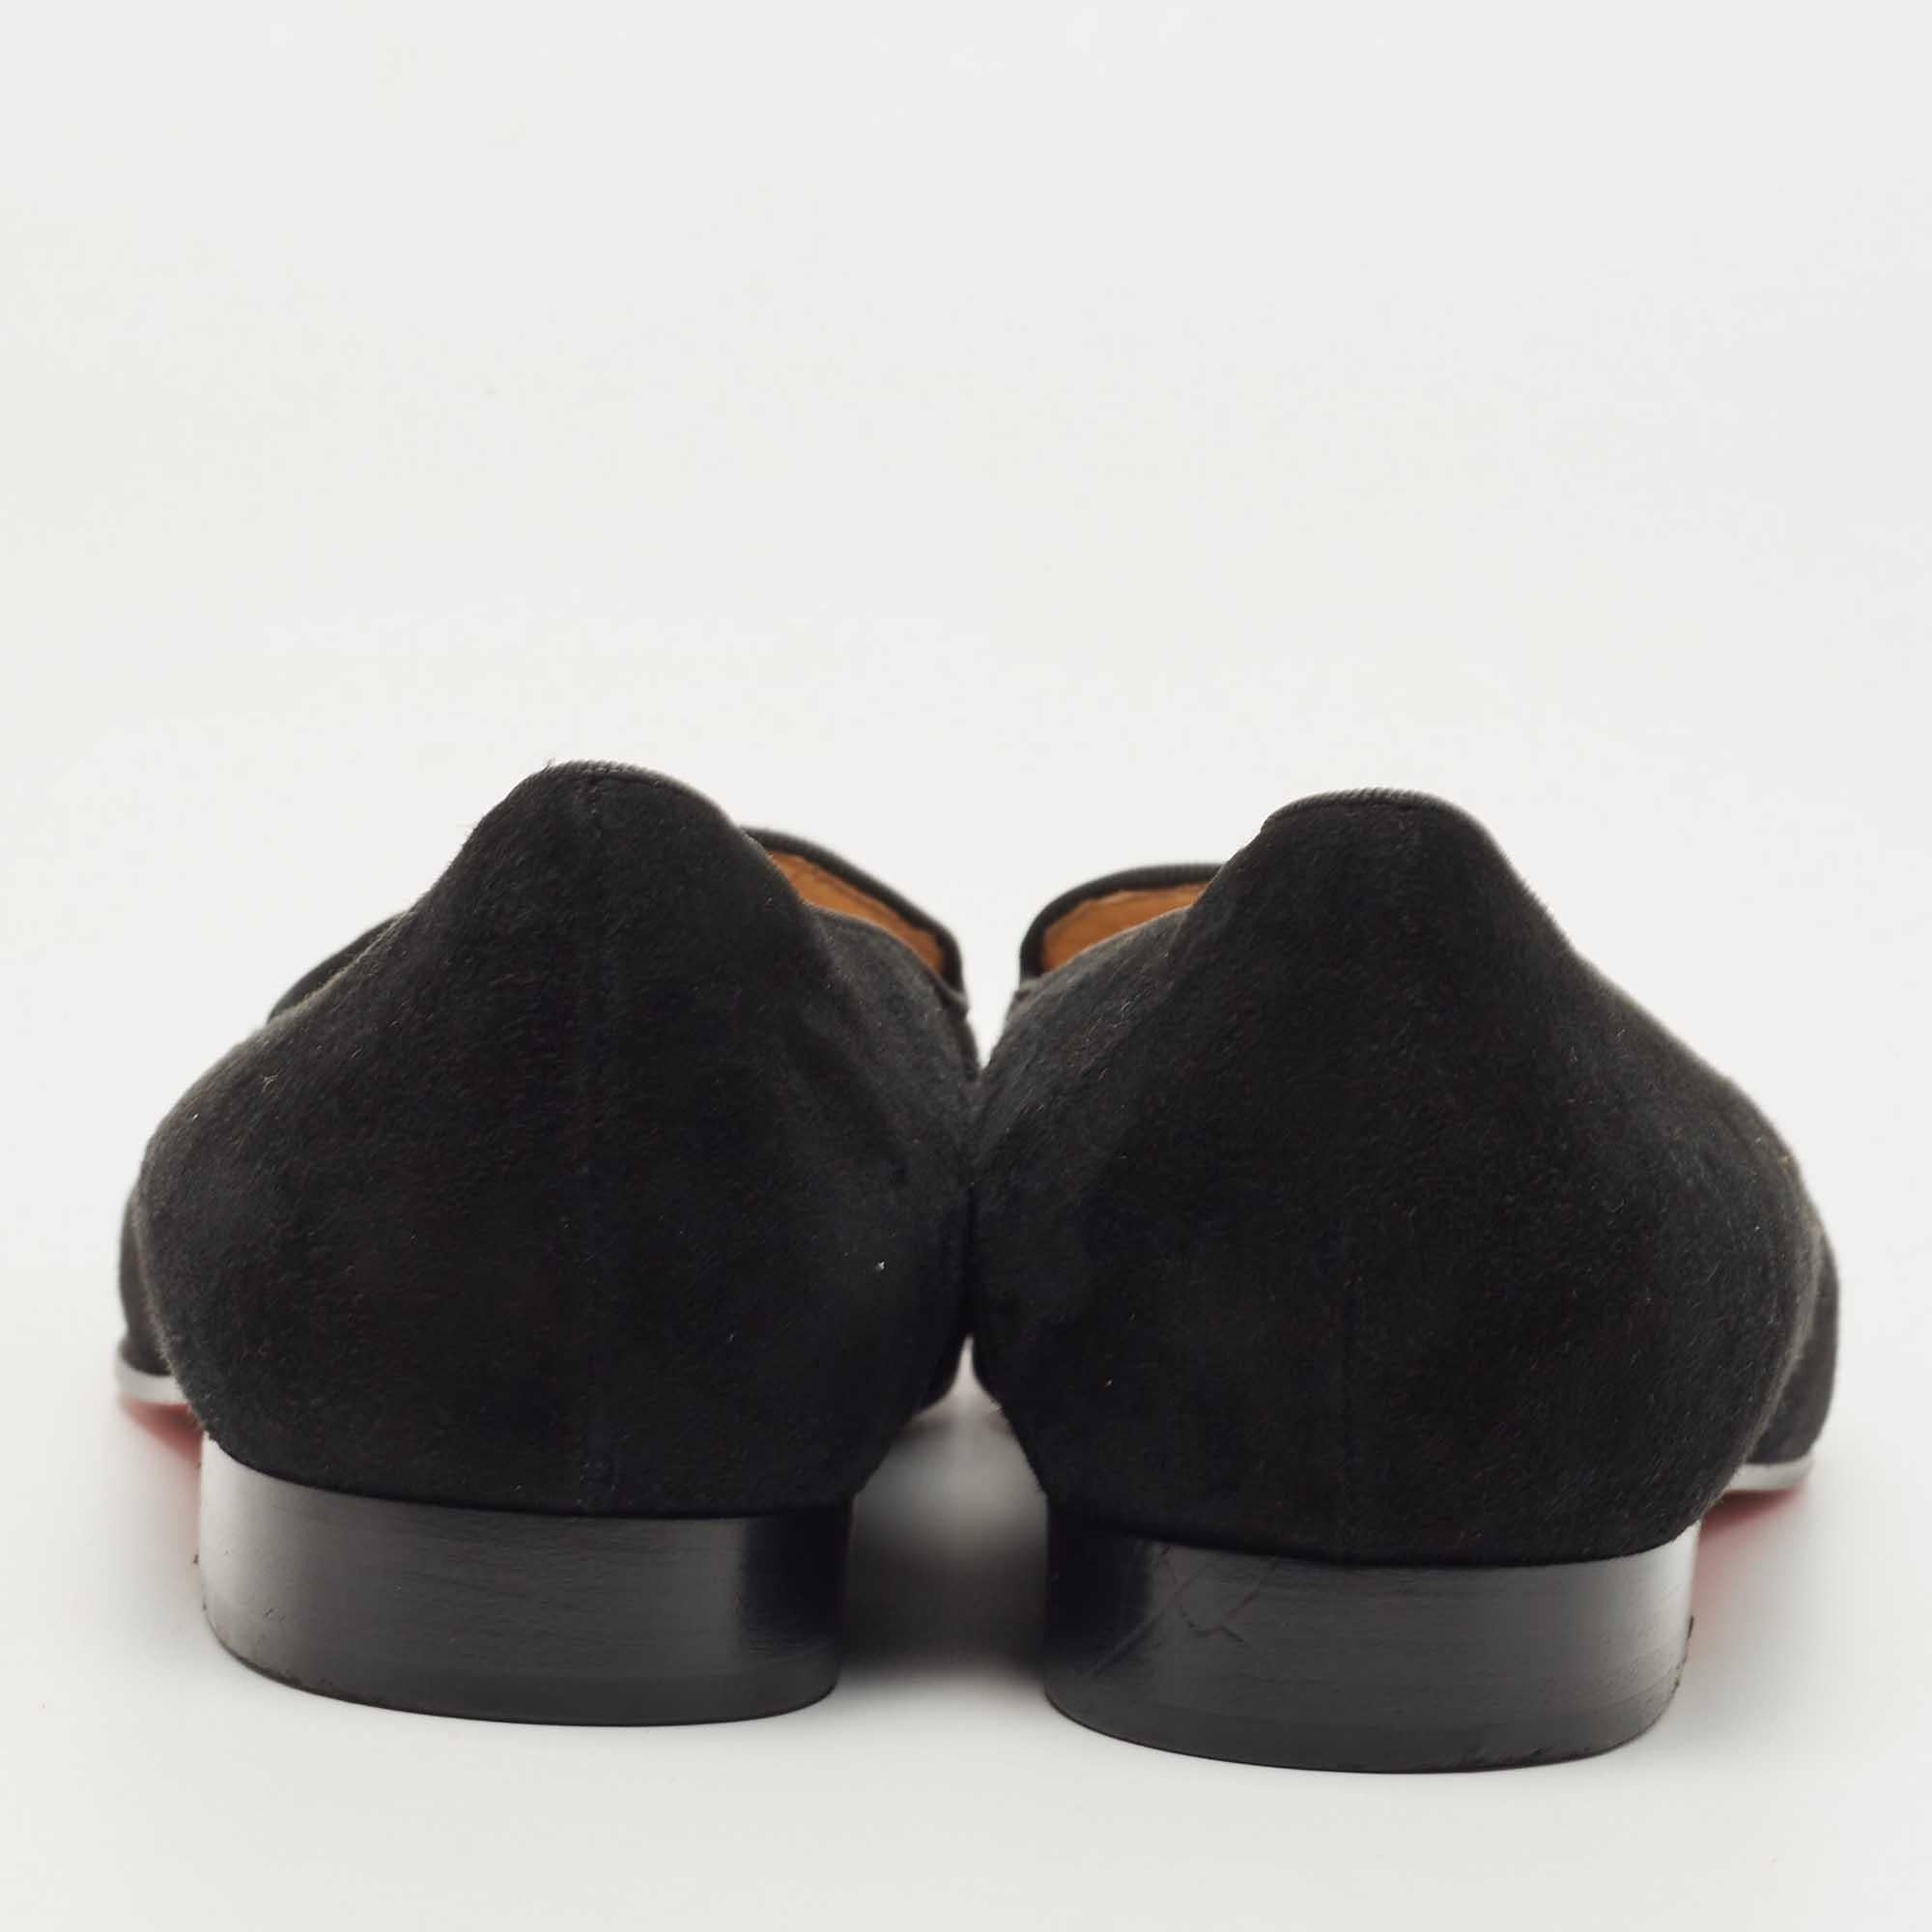 Christian Louboutin Black Suede Harvanana Spiked Smoking Slippers Size 36.5 For Sale 1